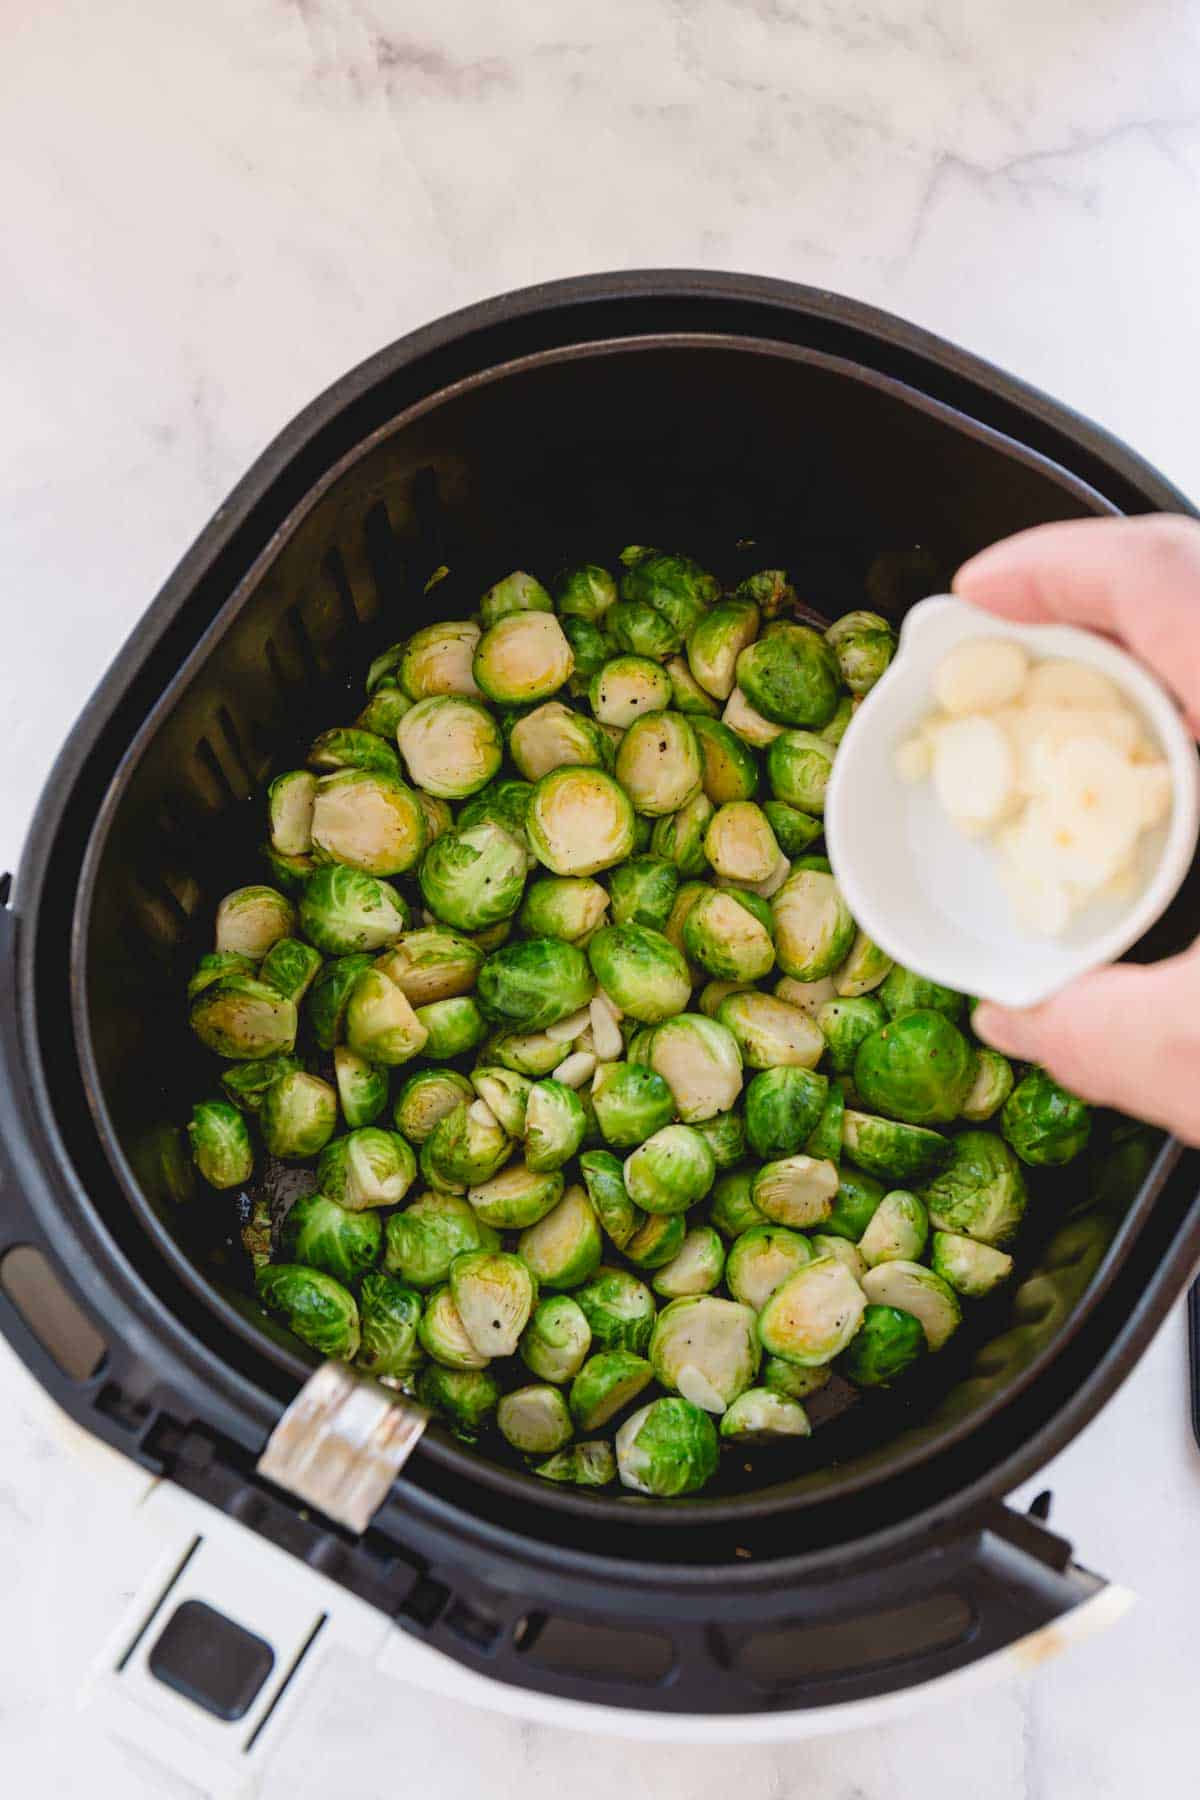 add garlic to the air fryer with brussels sprouts.